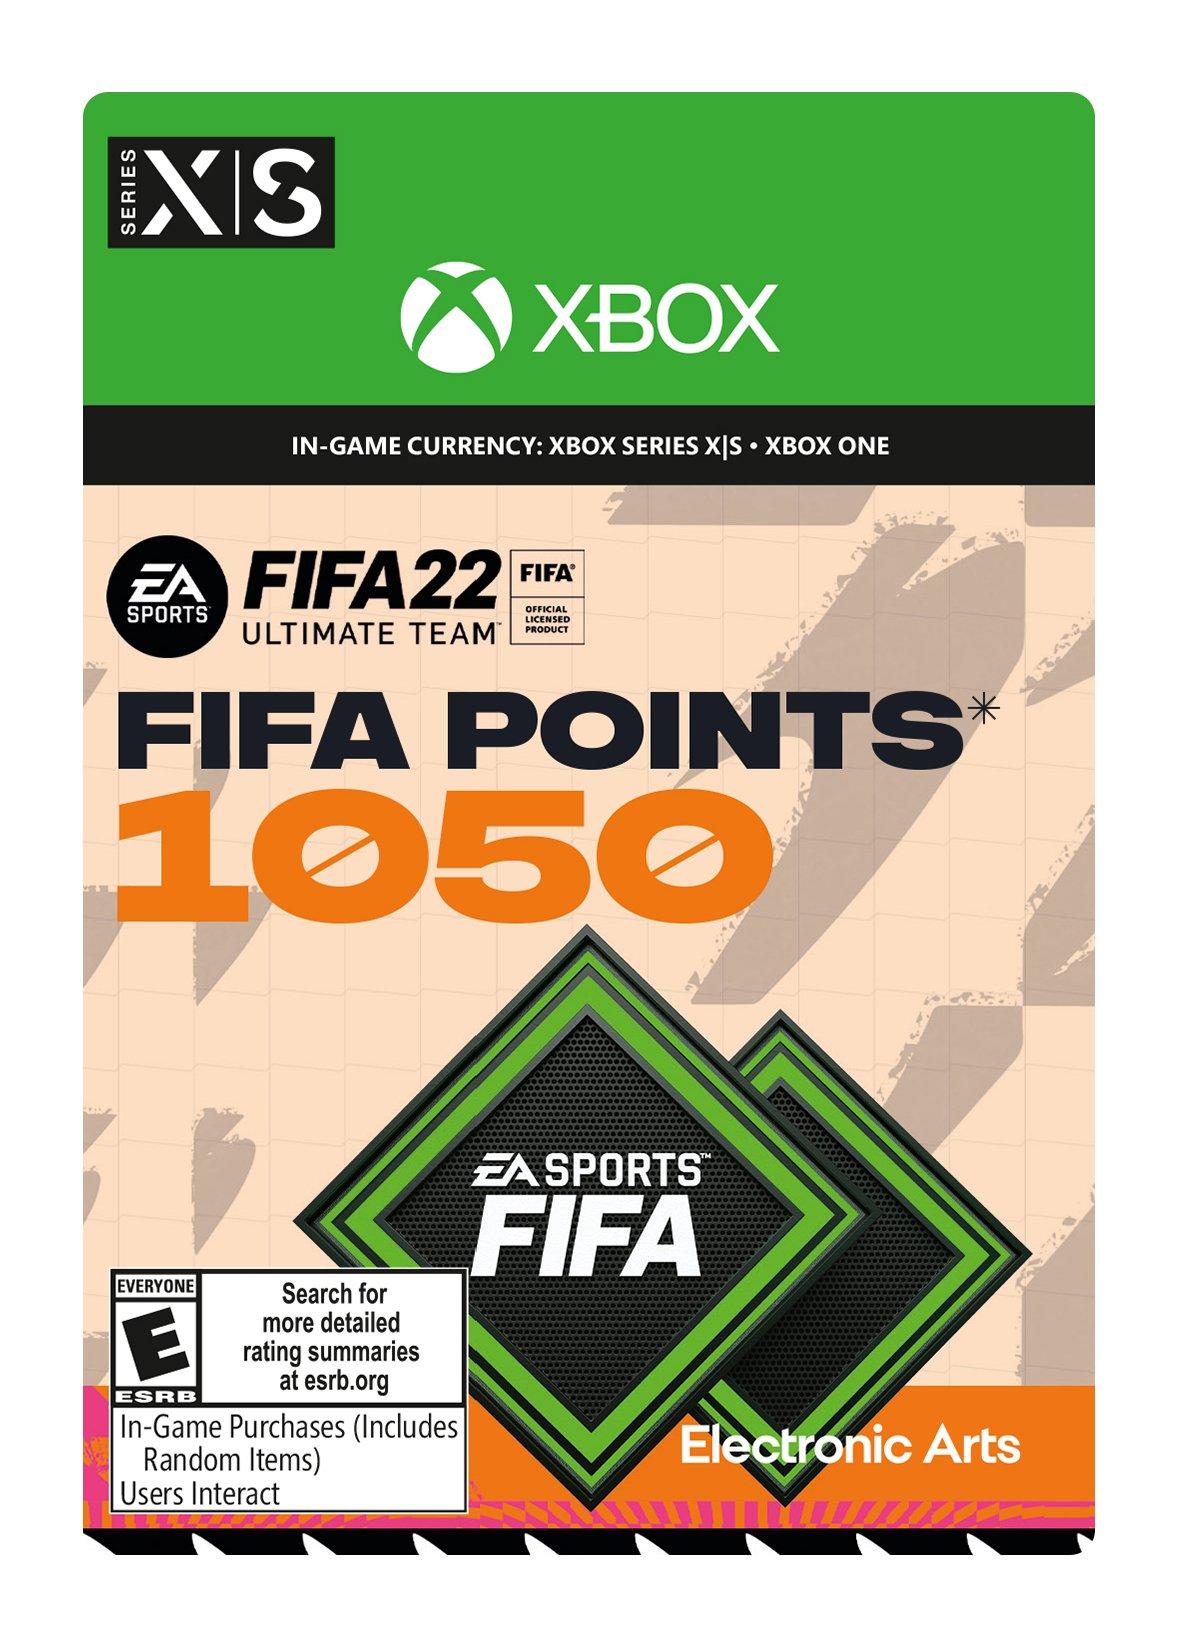 Kabelbane Distill Rationel FIFA 22 12,000 Ultimate Team Points - PS5 and PS4 | GameStop